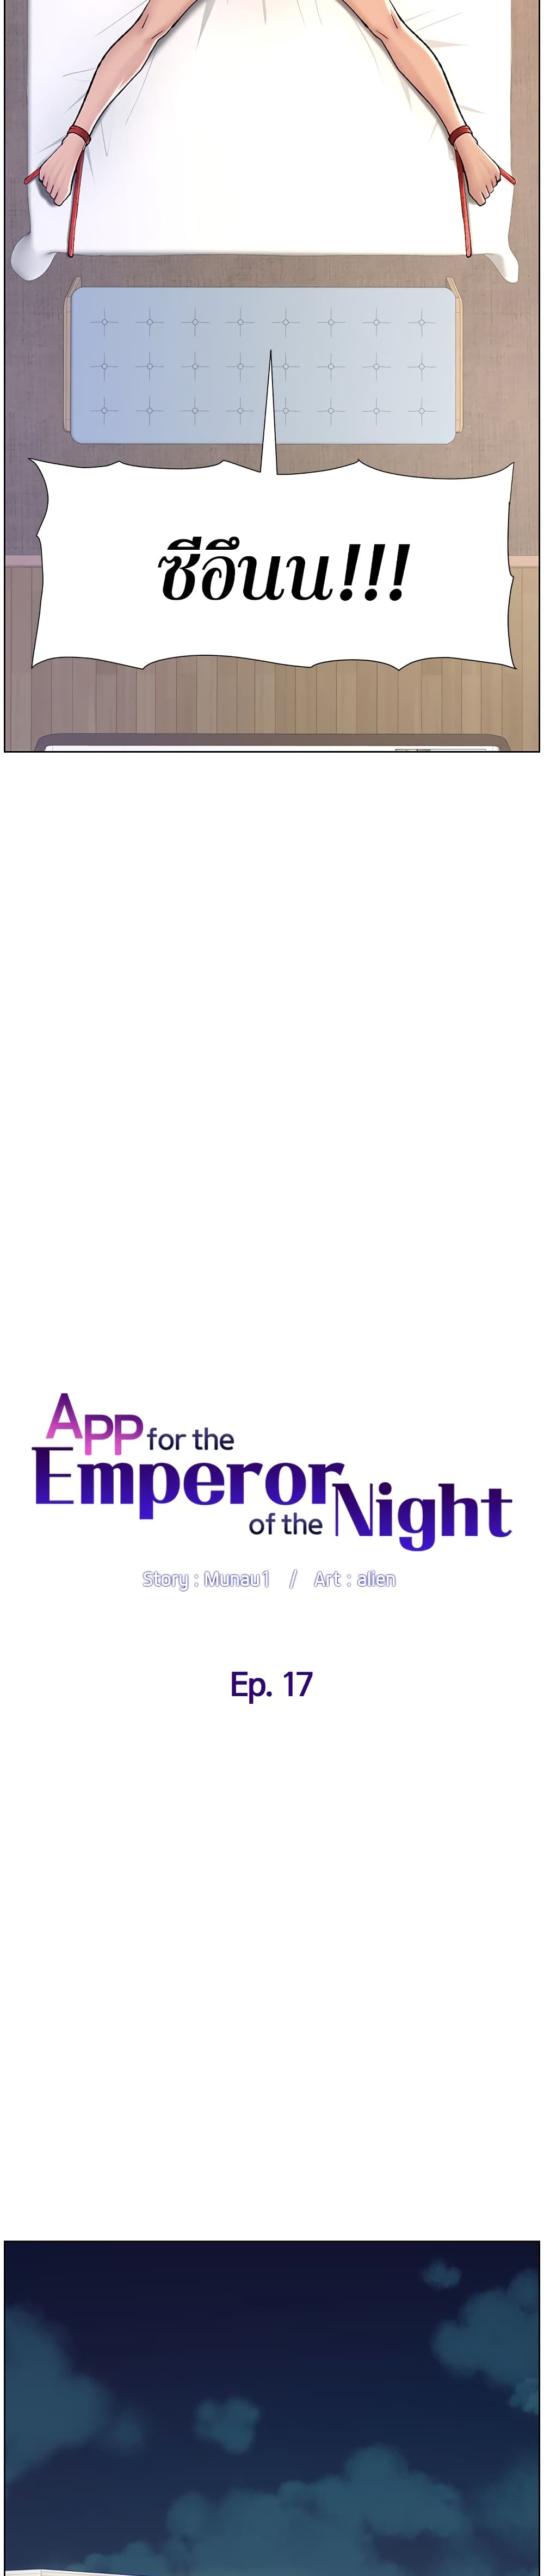 APP for the Emperor of the Night04